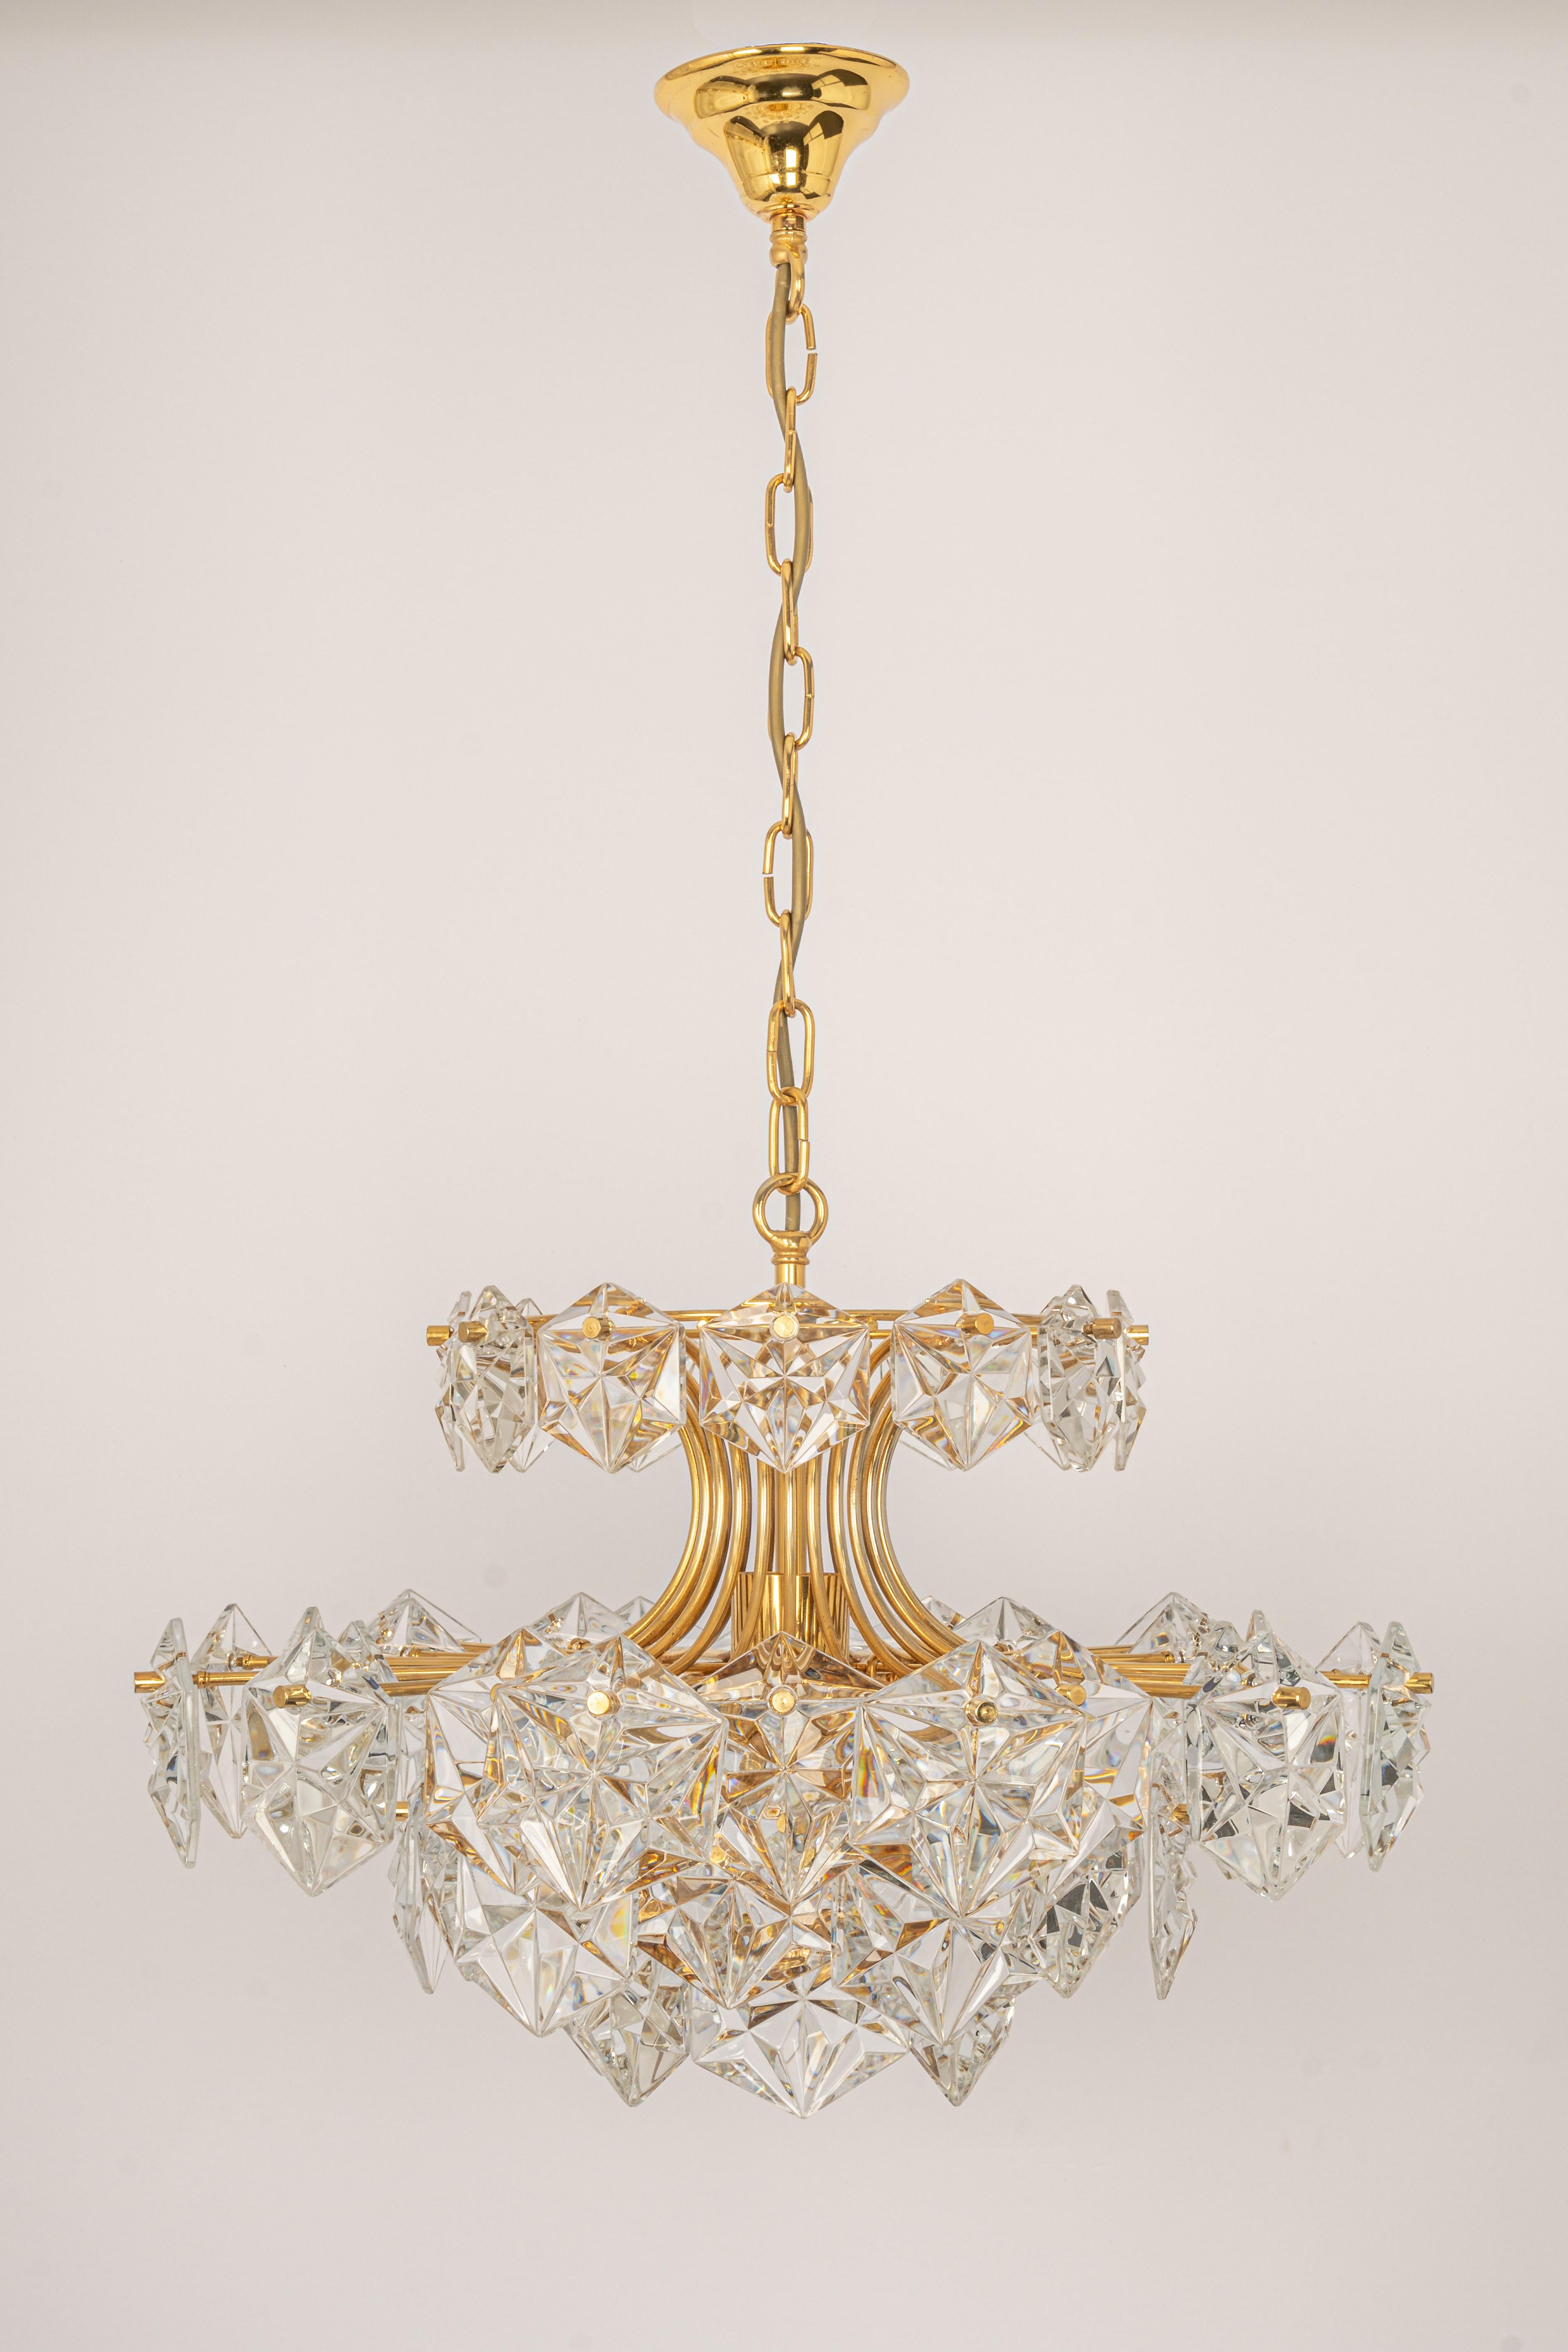 A stunning five-tier chandelier by Kinkeldey, Germany, was manufactured circa 1970-1979. A handmade and high-quality piece. The ceiling fixture and the frame are made of brass and have five rings with lots of facetted crystal glass